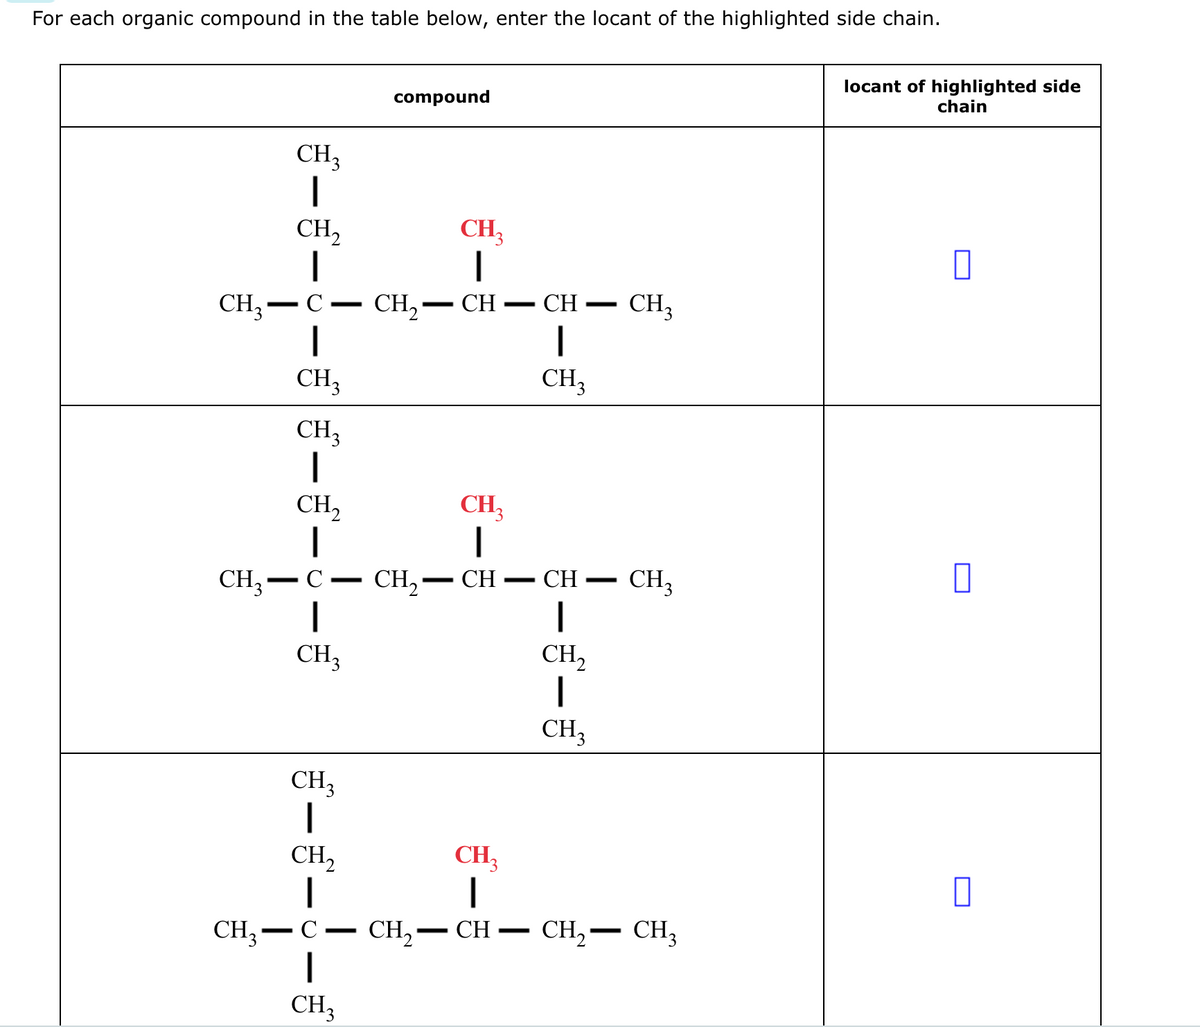 For each organic compound in the table below, enter the locant of the highlighted side chain.
CH3-
CH3-
—
CH3-
—
CH3
1
CH₂
|
C
|
CH₂
-
CH3
1
CH,
1
—
|
CH₂
CH3
1
CH₂
-
CH₂
compound
CH₂-
CH₂
-
—
CH₂-
CH3
CH-
CH₂
|
CH
CH,
|
CH
-
CH
1
CH3
CH-CH3
CH₂
|
CH3
CH3
—
CH₂ CH3
locant of highlighted side
chain
0